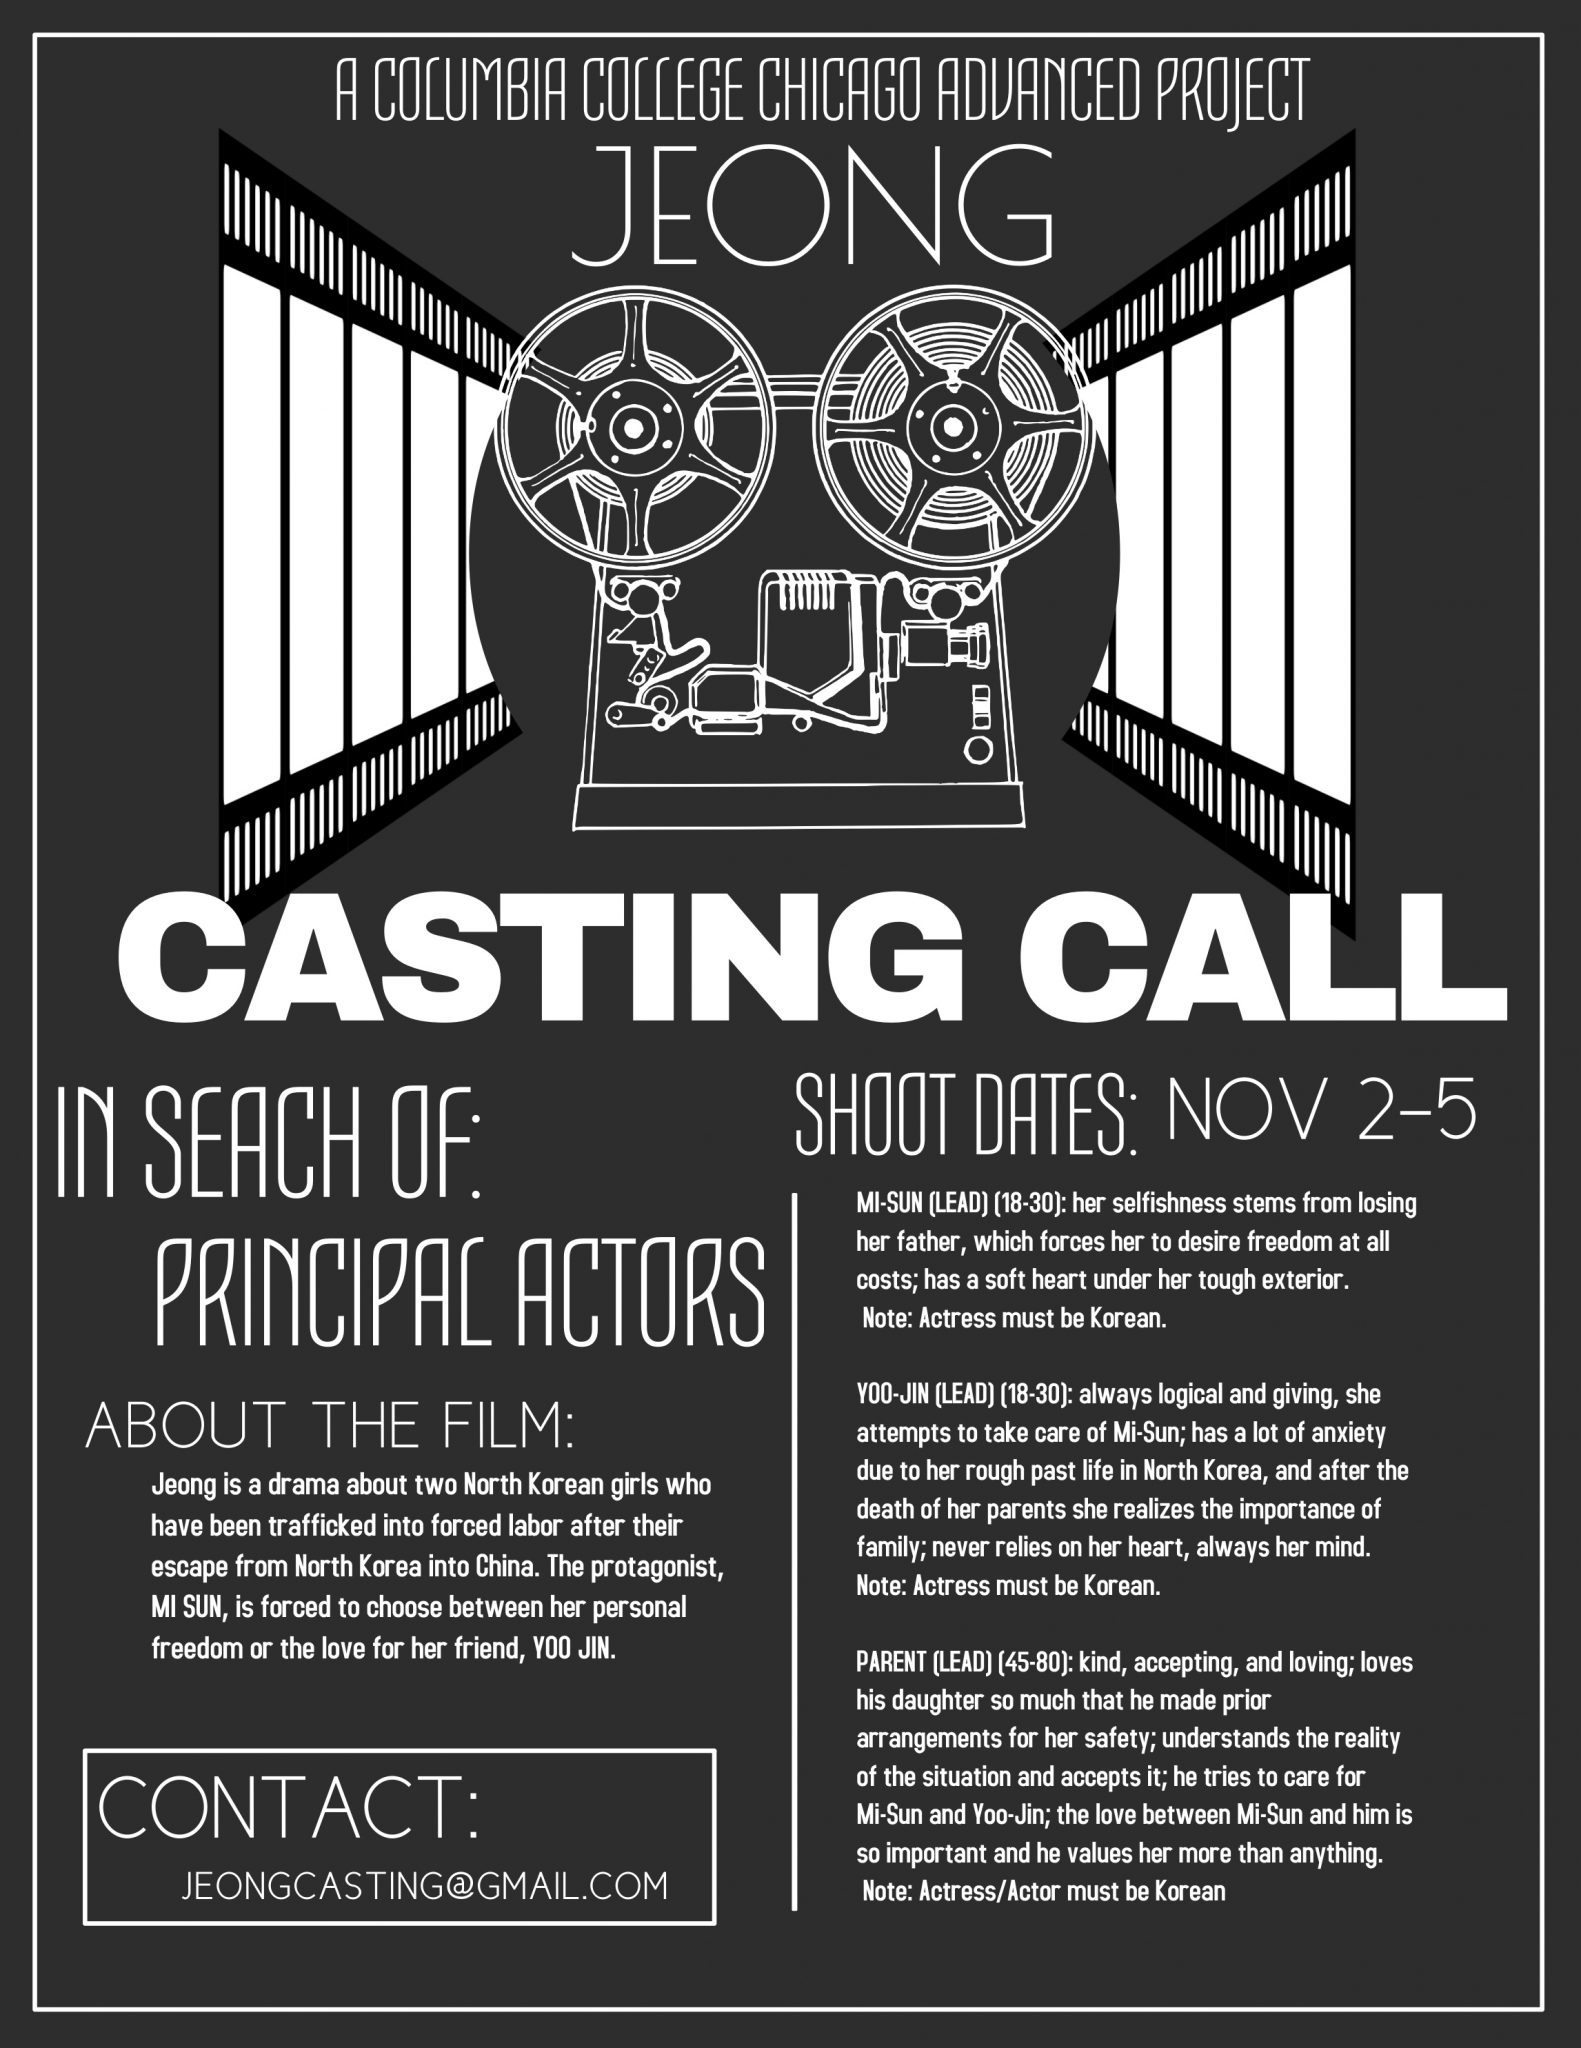 Casting Korean Actors in Chicago for Student Film “Jeong” Auditions Free